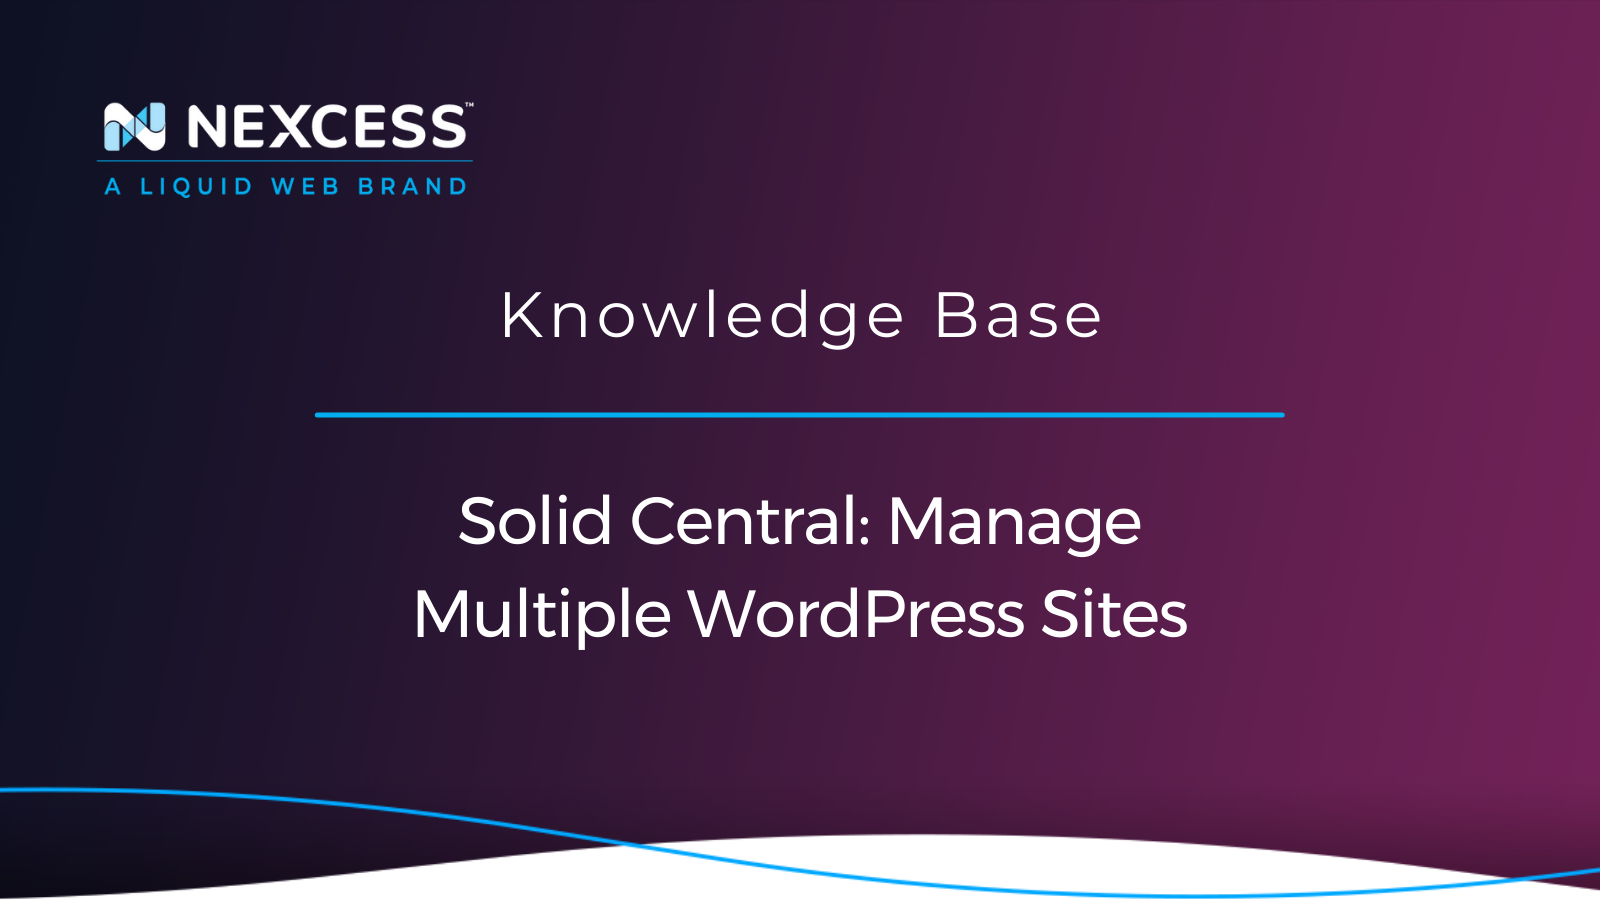 Solid Central: Manage Multiple WordPress Sites